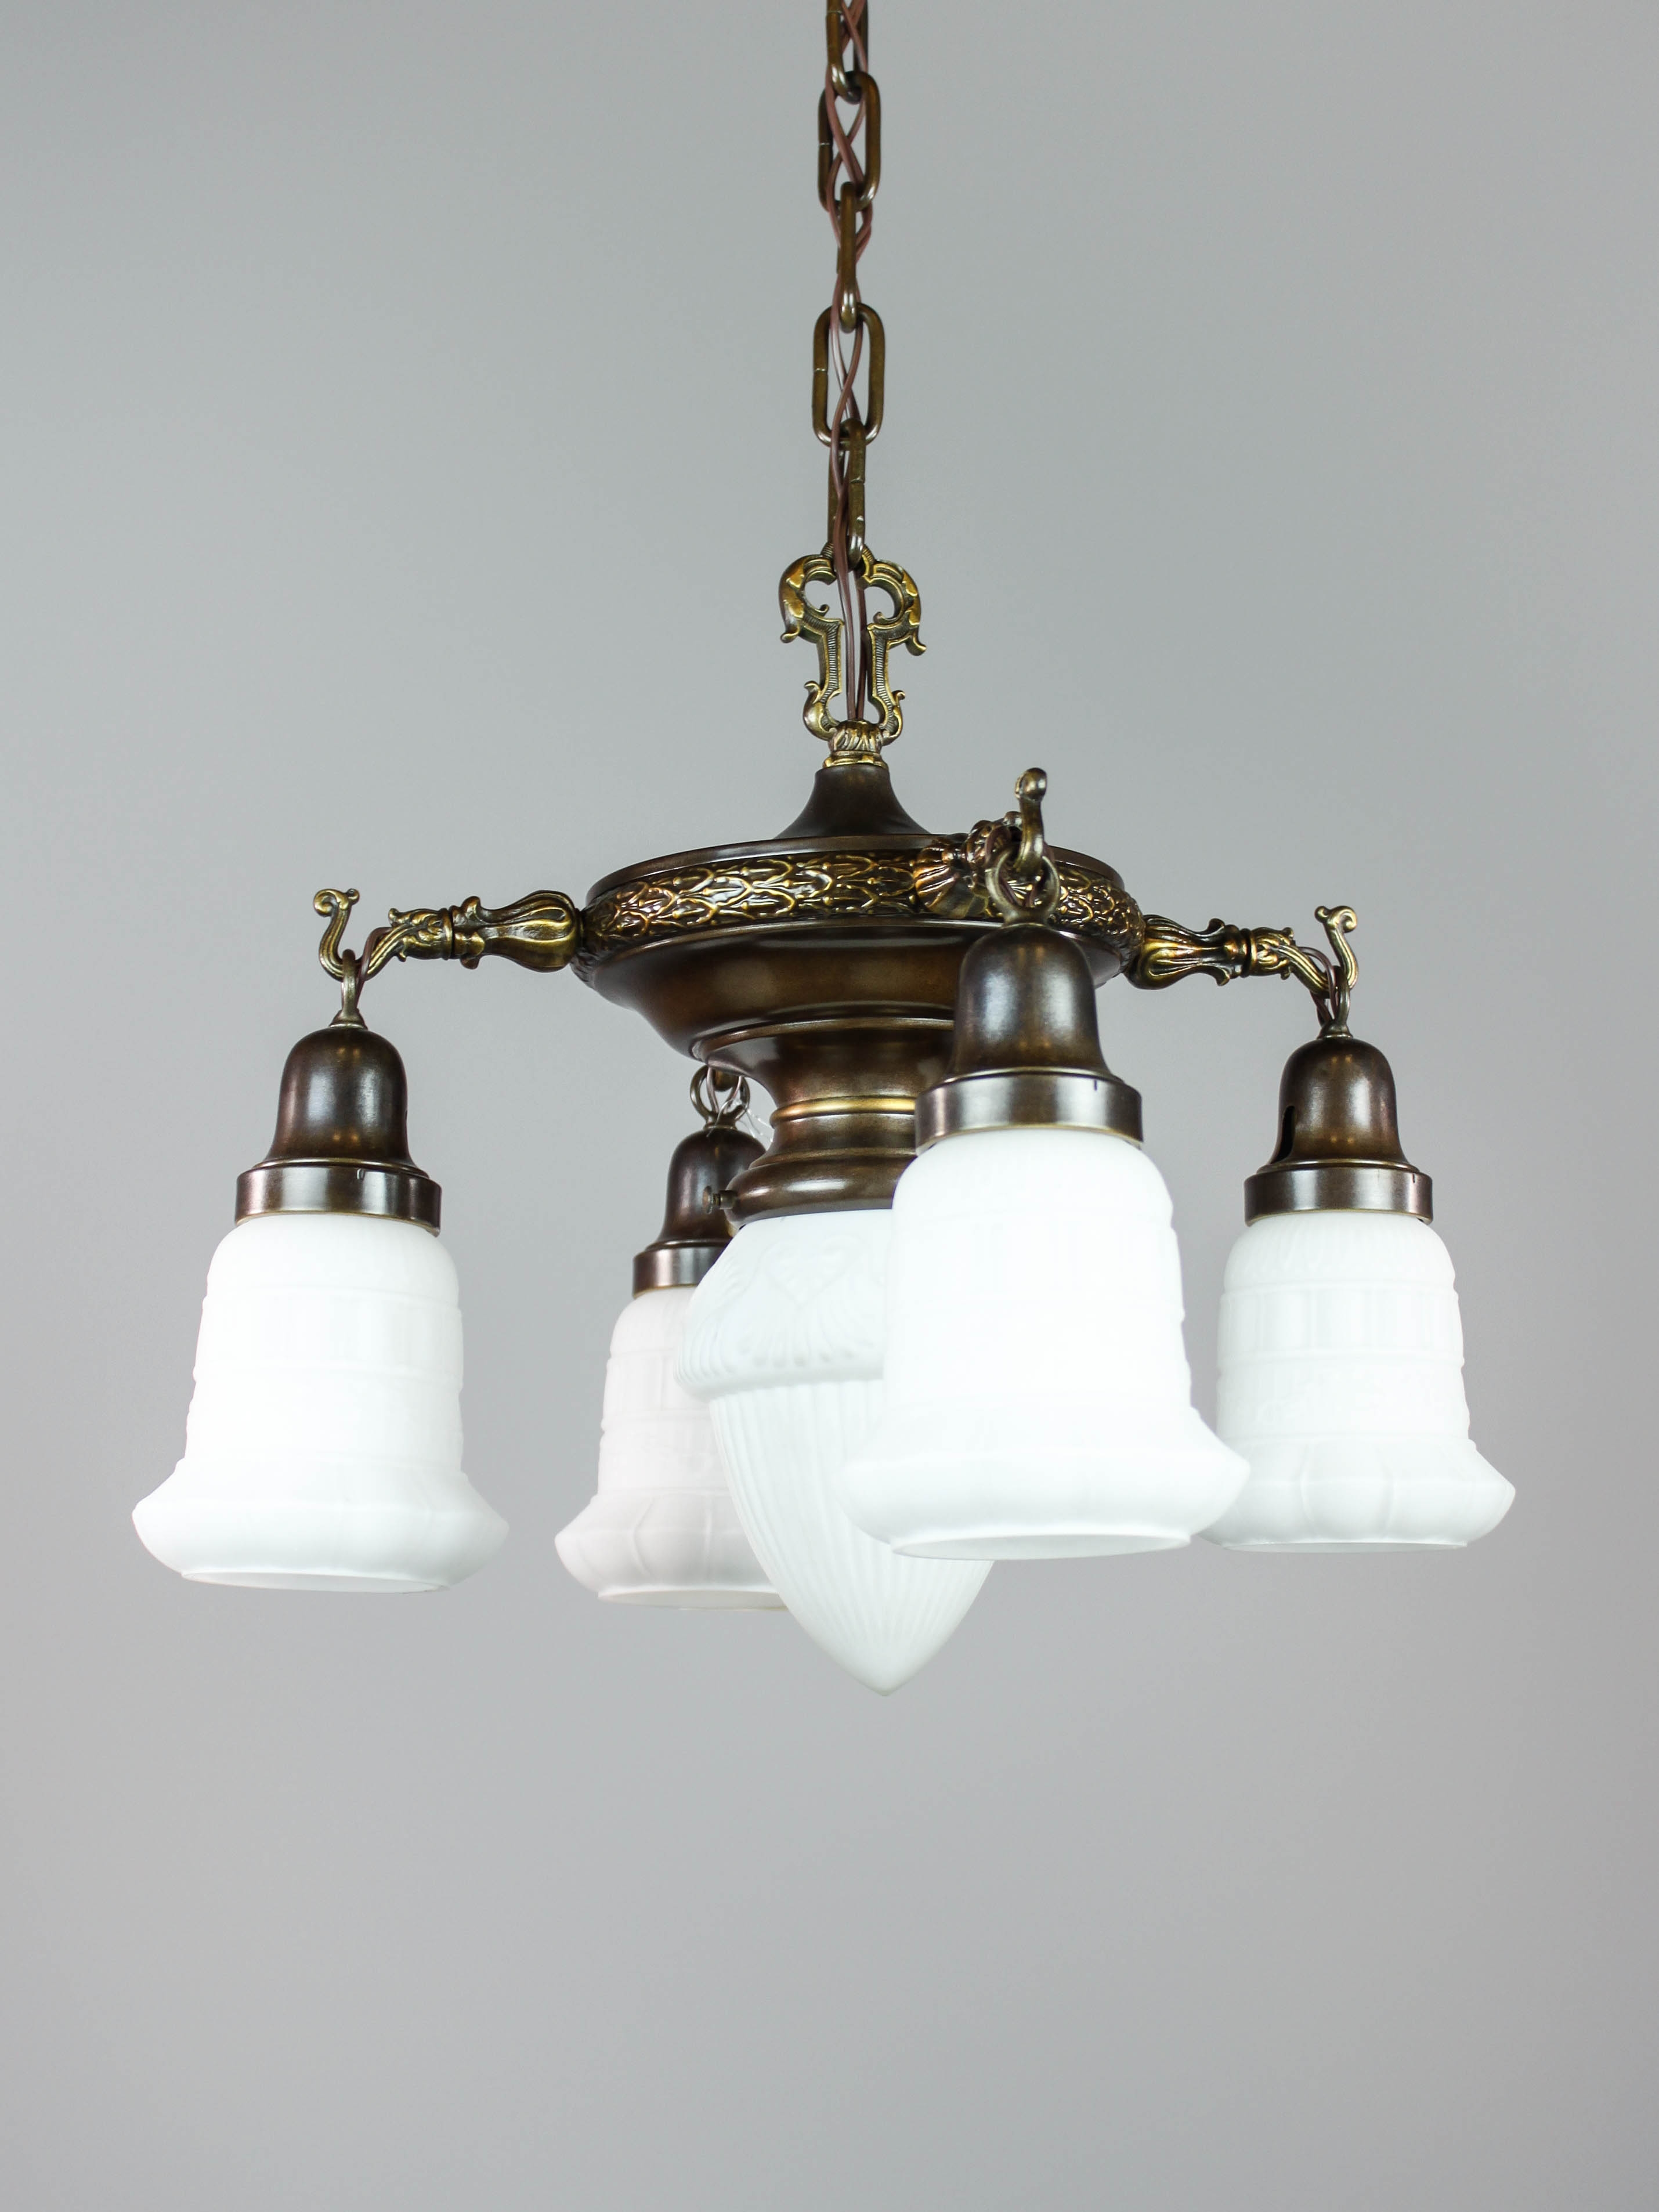 Permalink to Colonial Revival Ceiling Lights